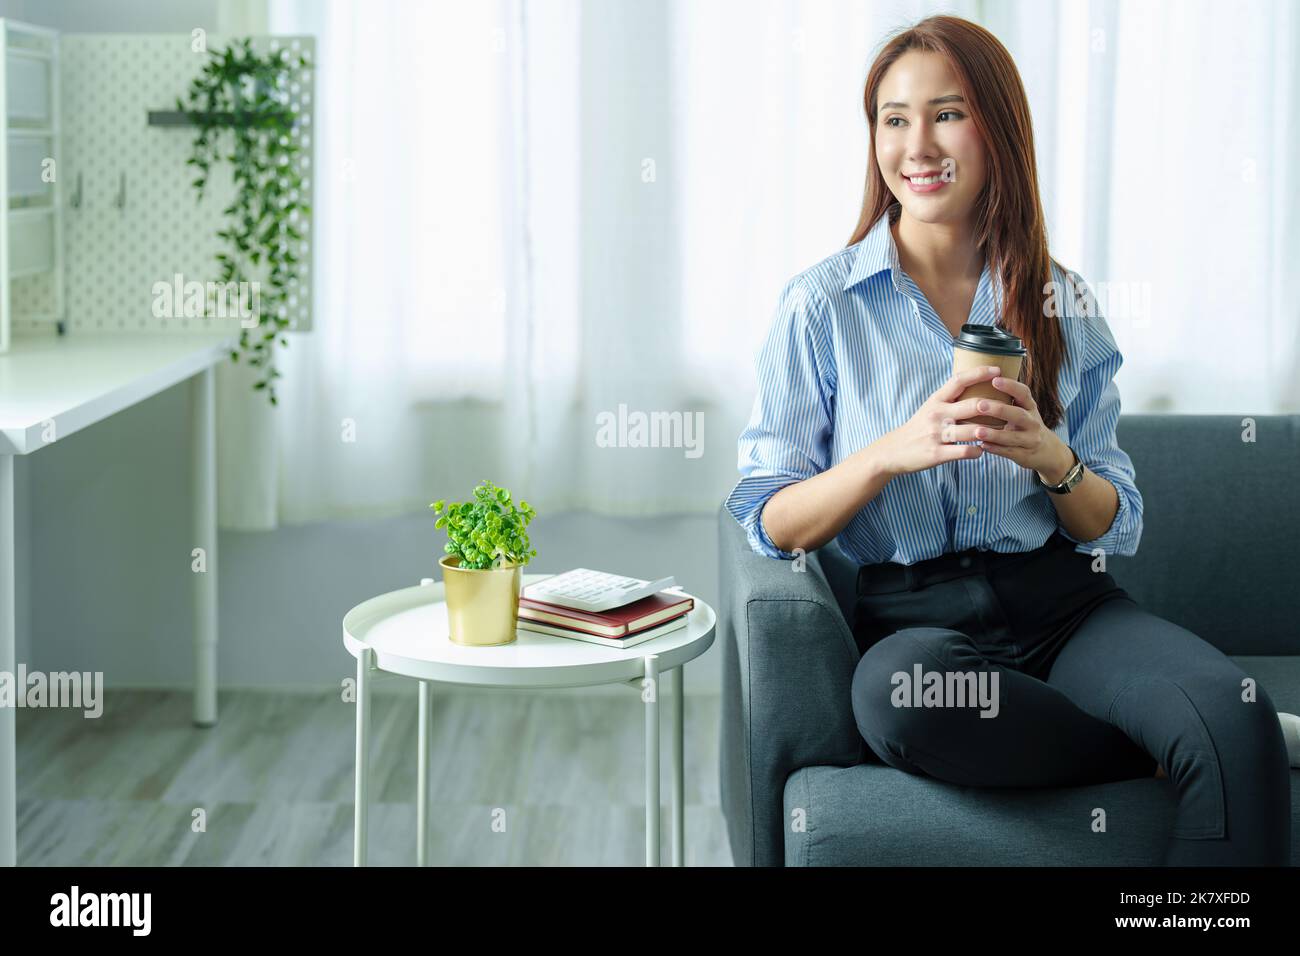 Entrepreneurs, Business Owners, Accountants, Portrait of a Small Business Startup Asians hold happy smiling faces while drinking coffee while taking a Stock Photo